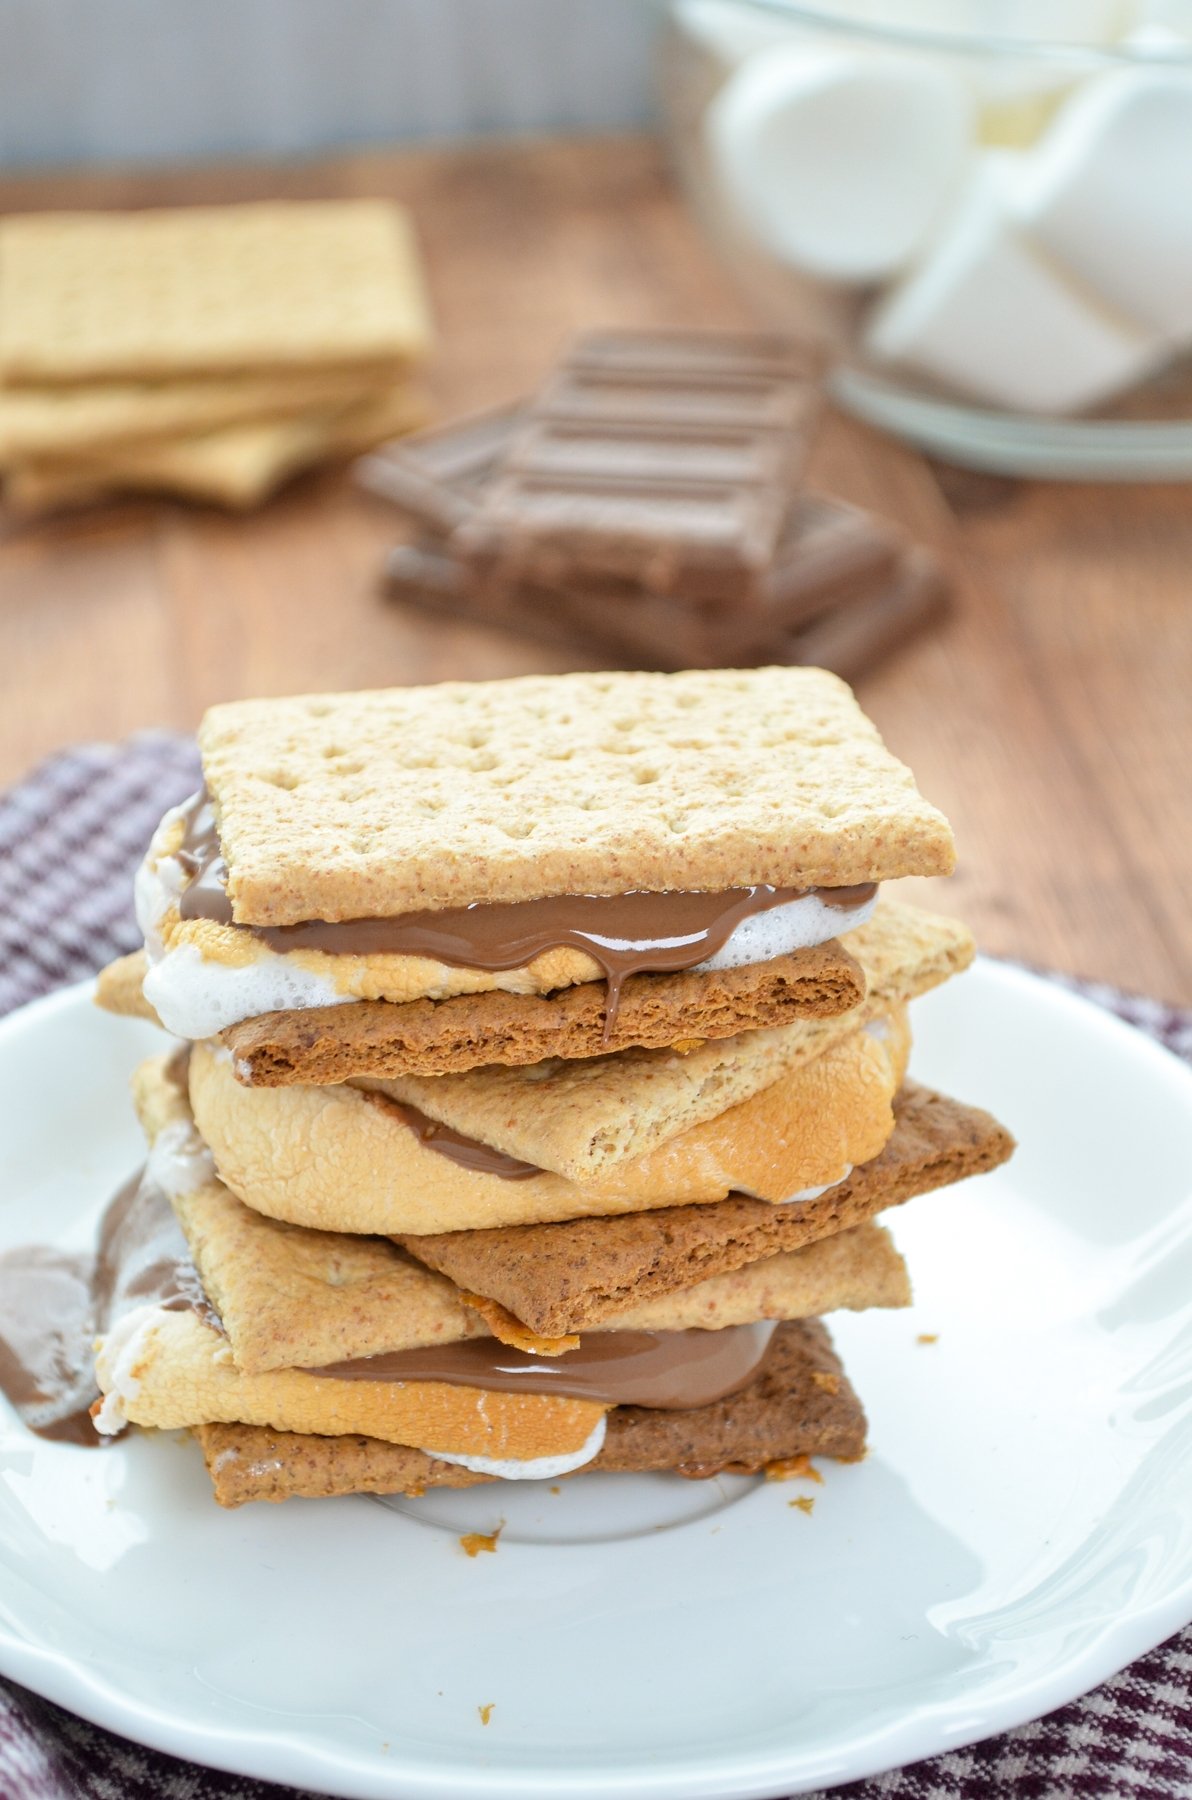 A stack of three s'mores with chocolate, marshmallows, and graham crackers in the background.